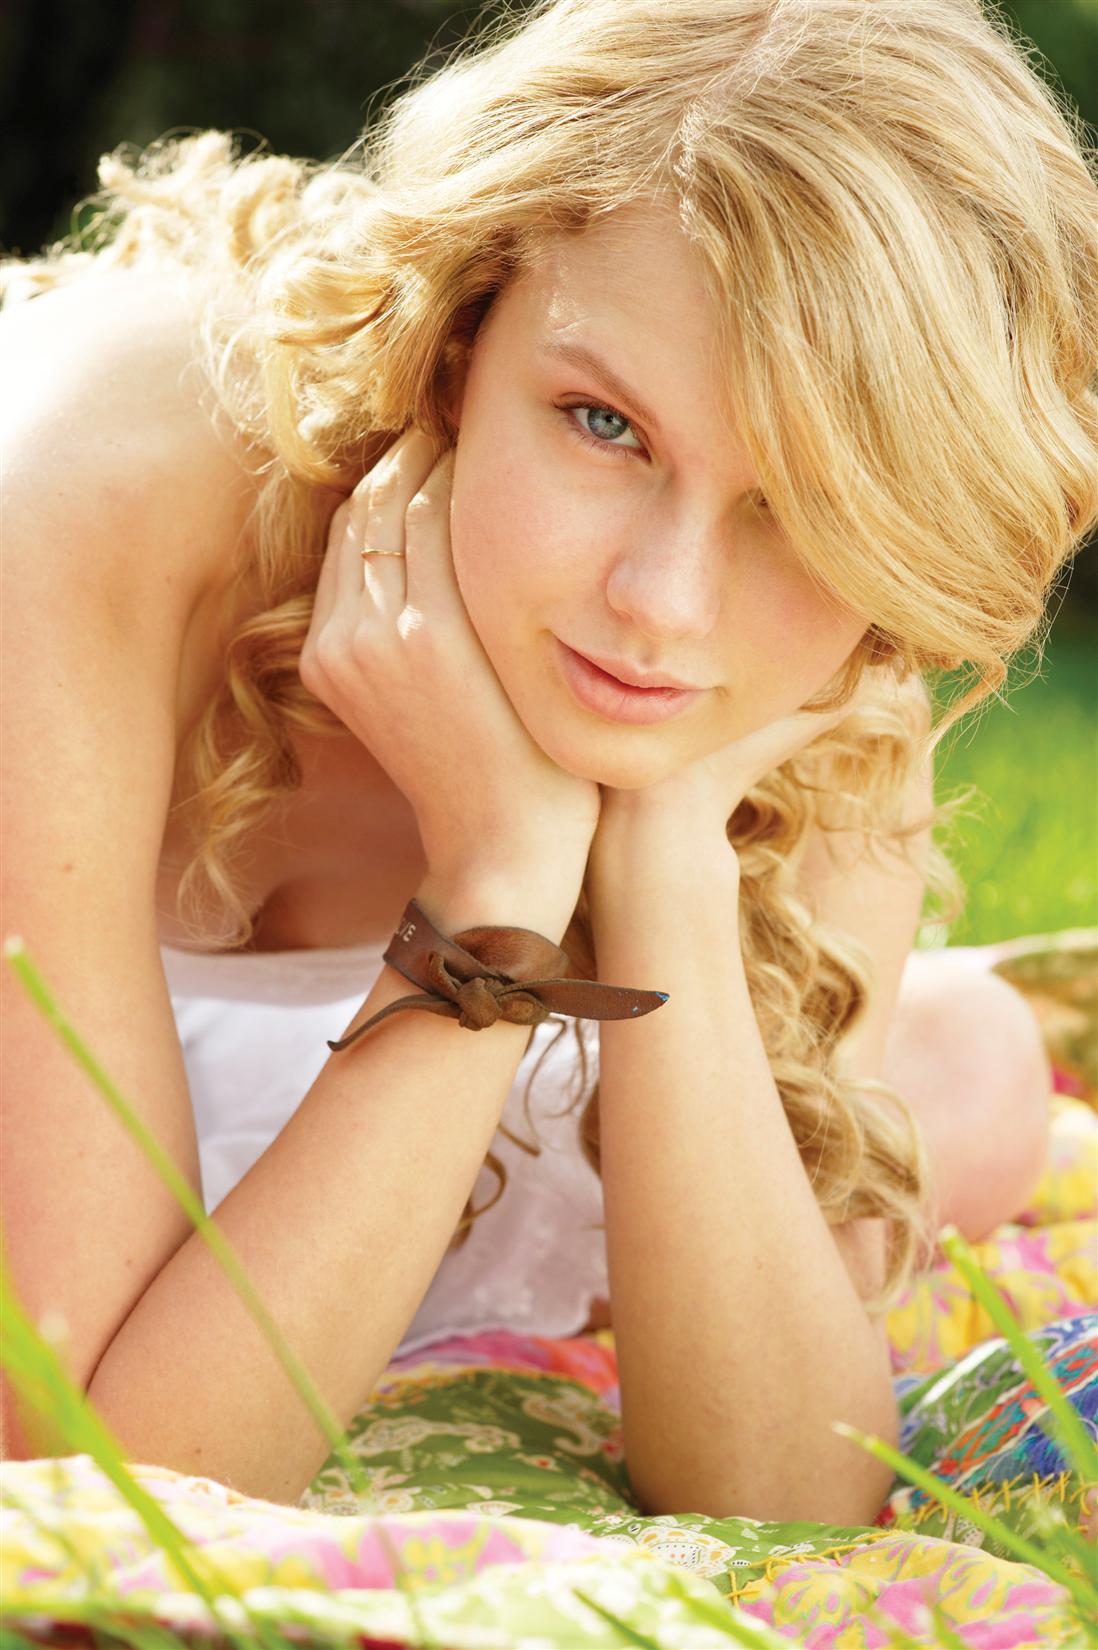 Taylor Swift with no makeup picture 12 of 12